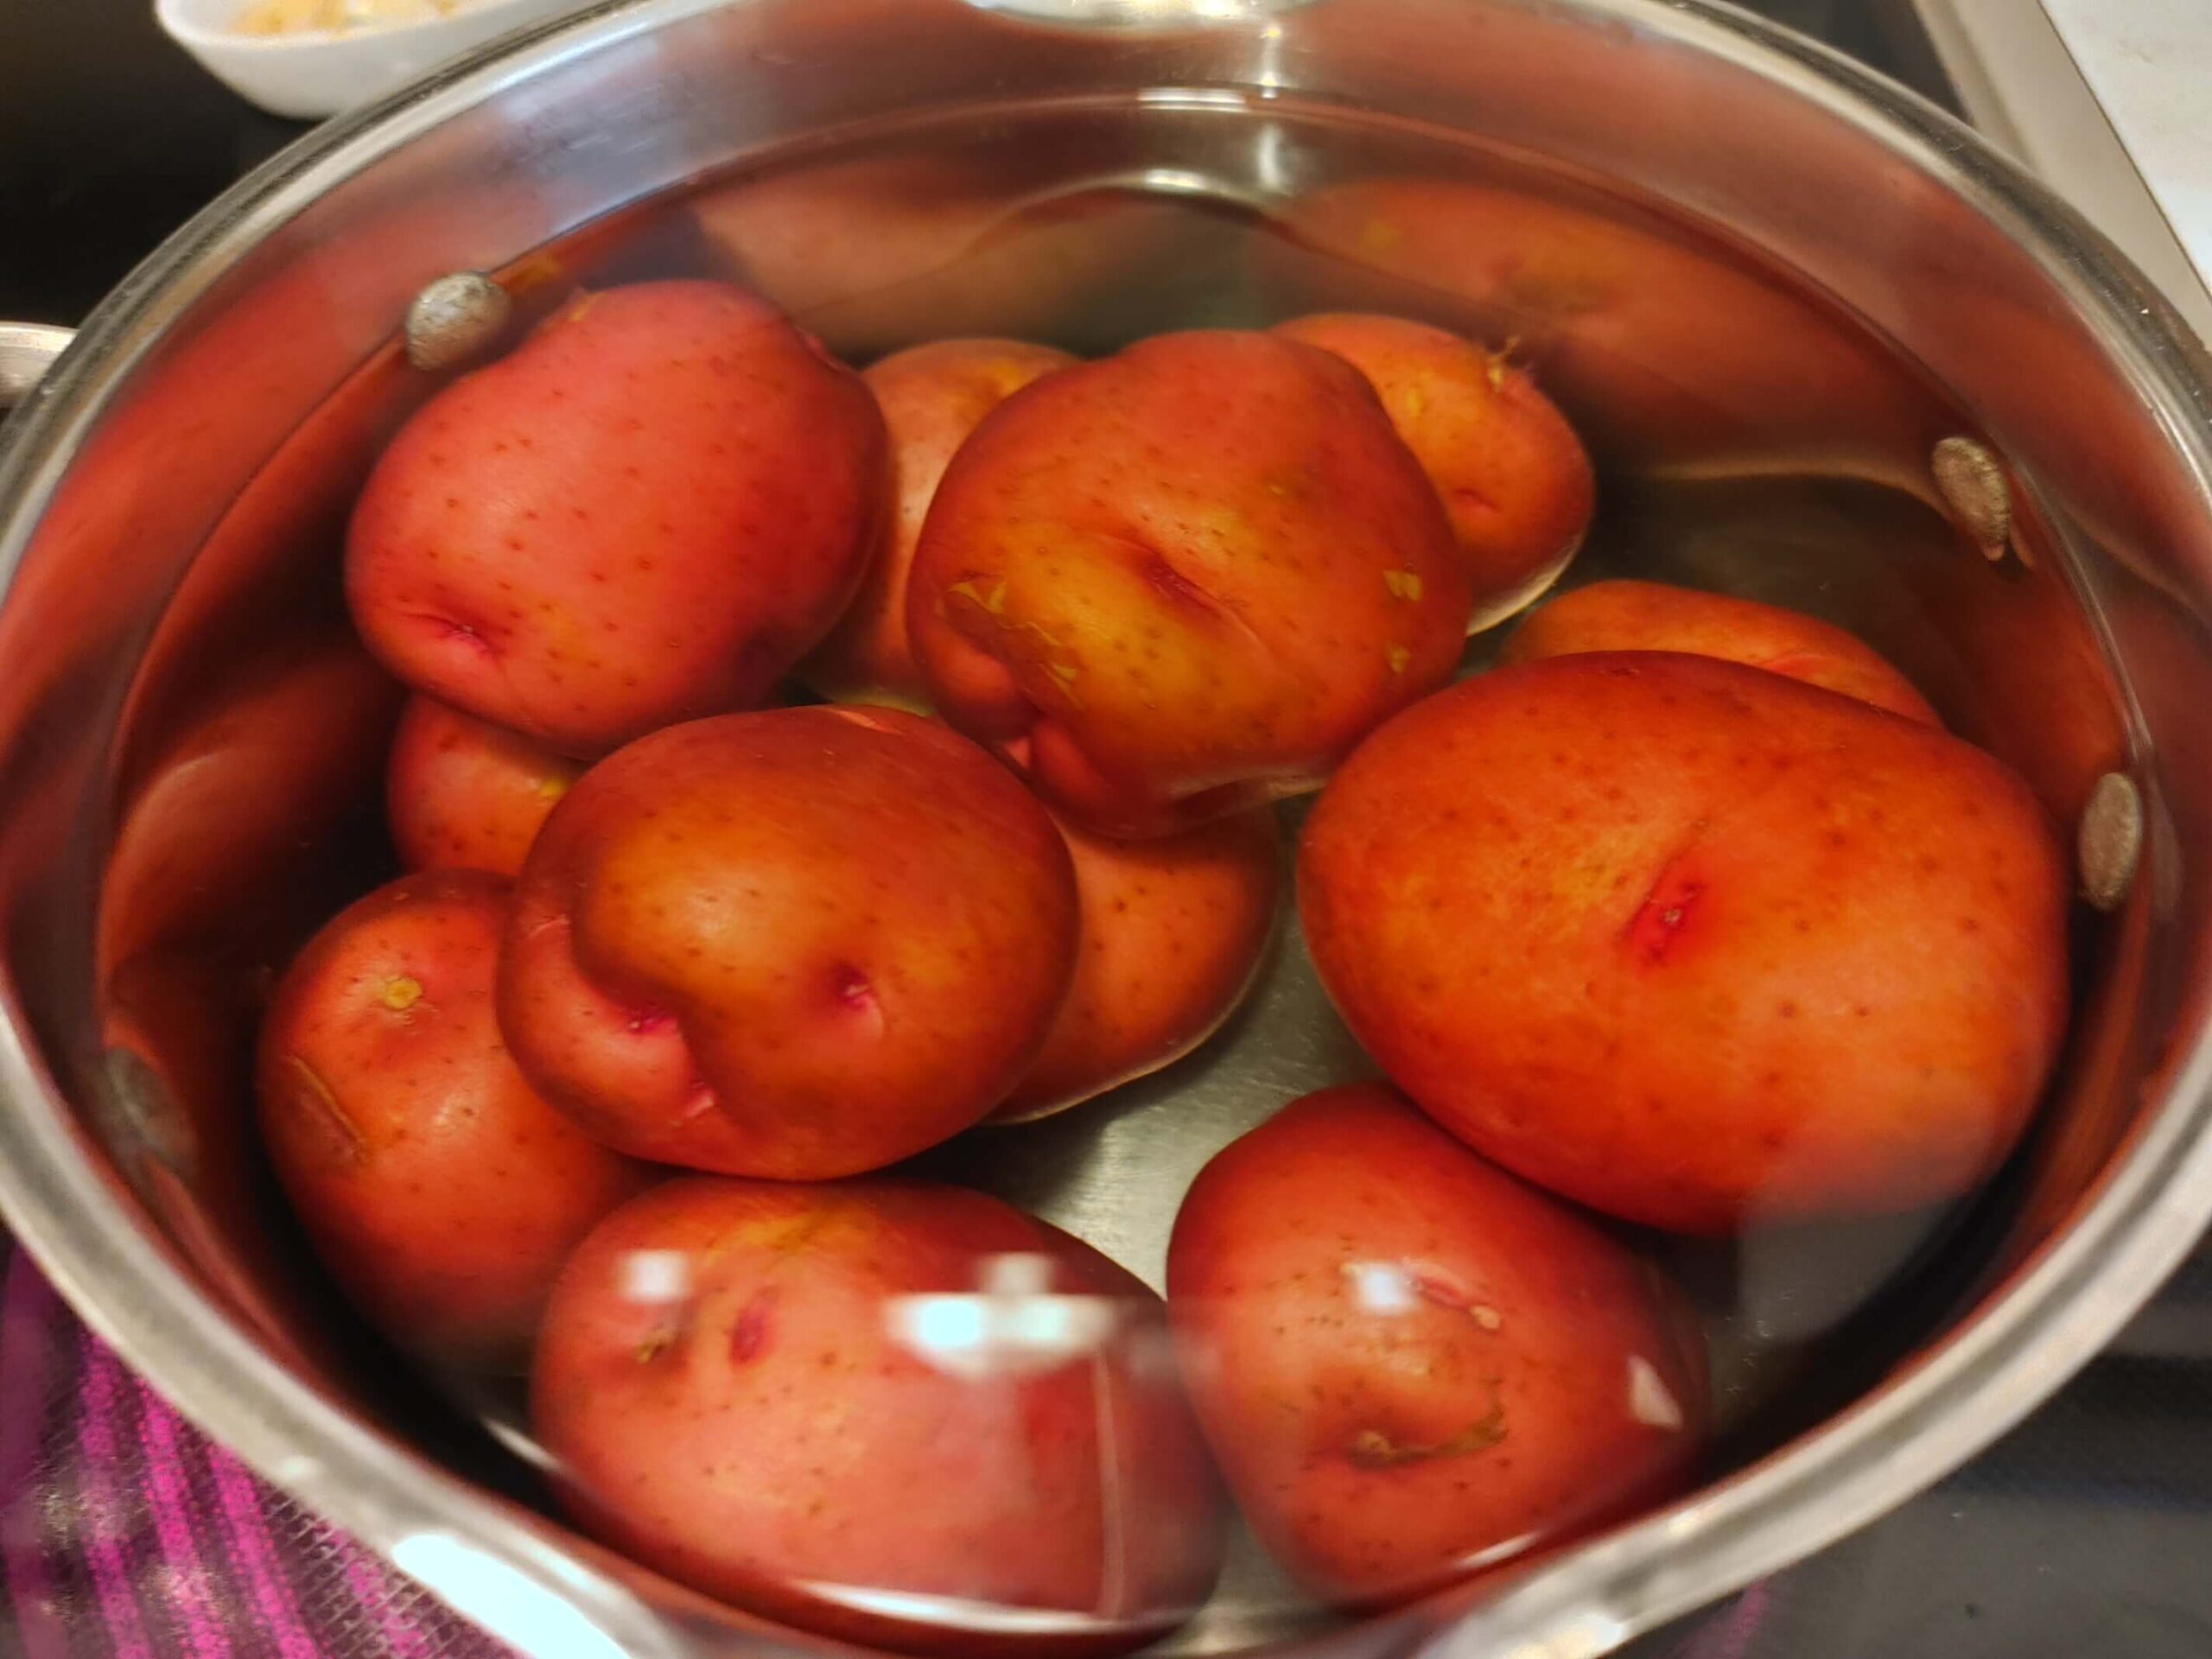 PLACING RED POTATOES TO BOIL